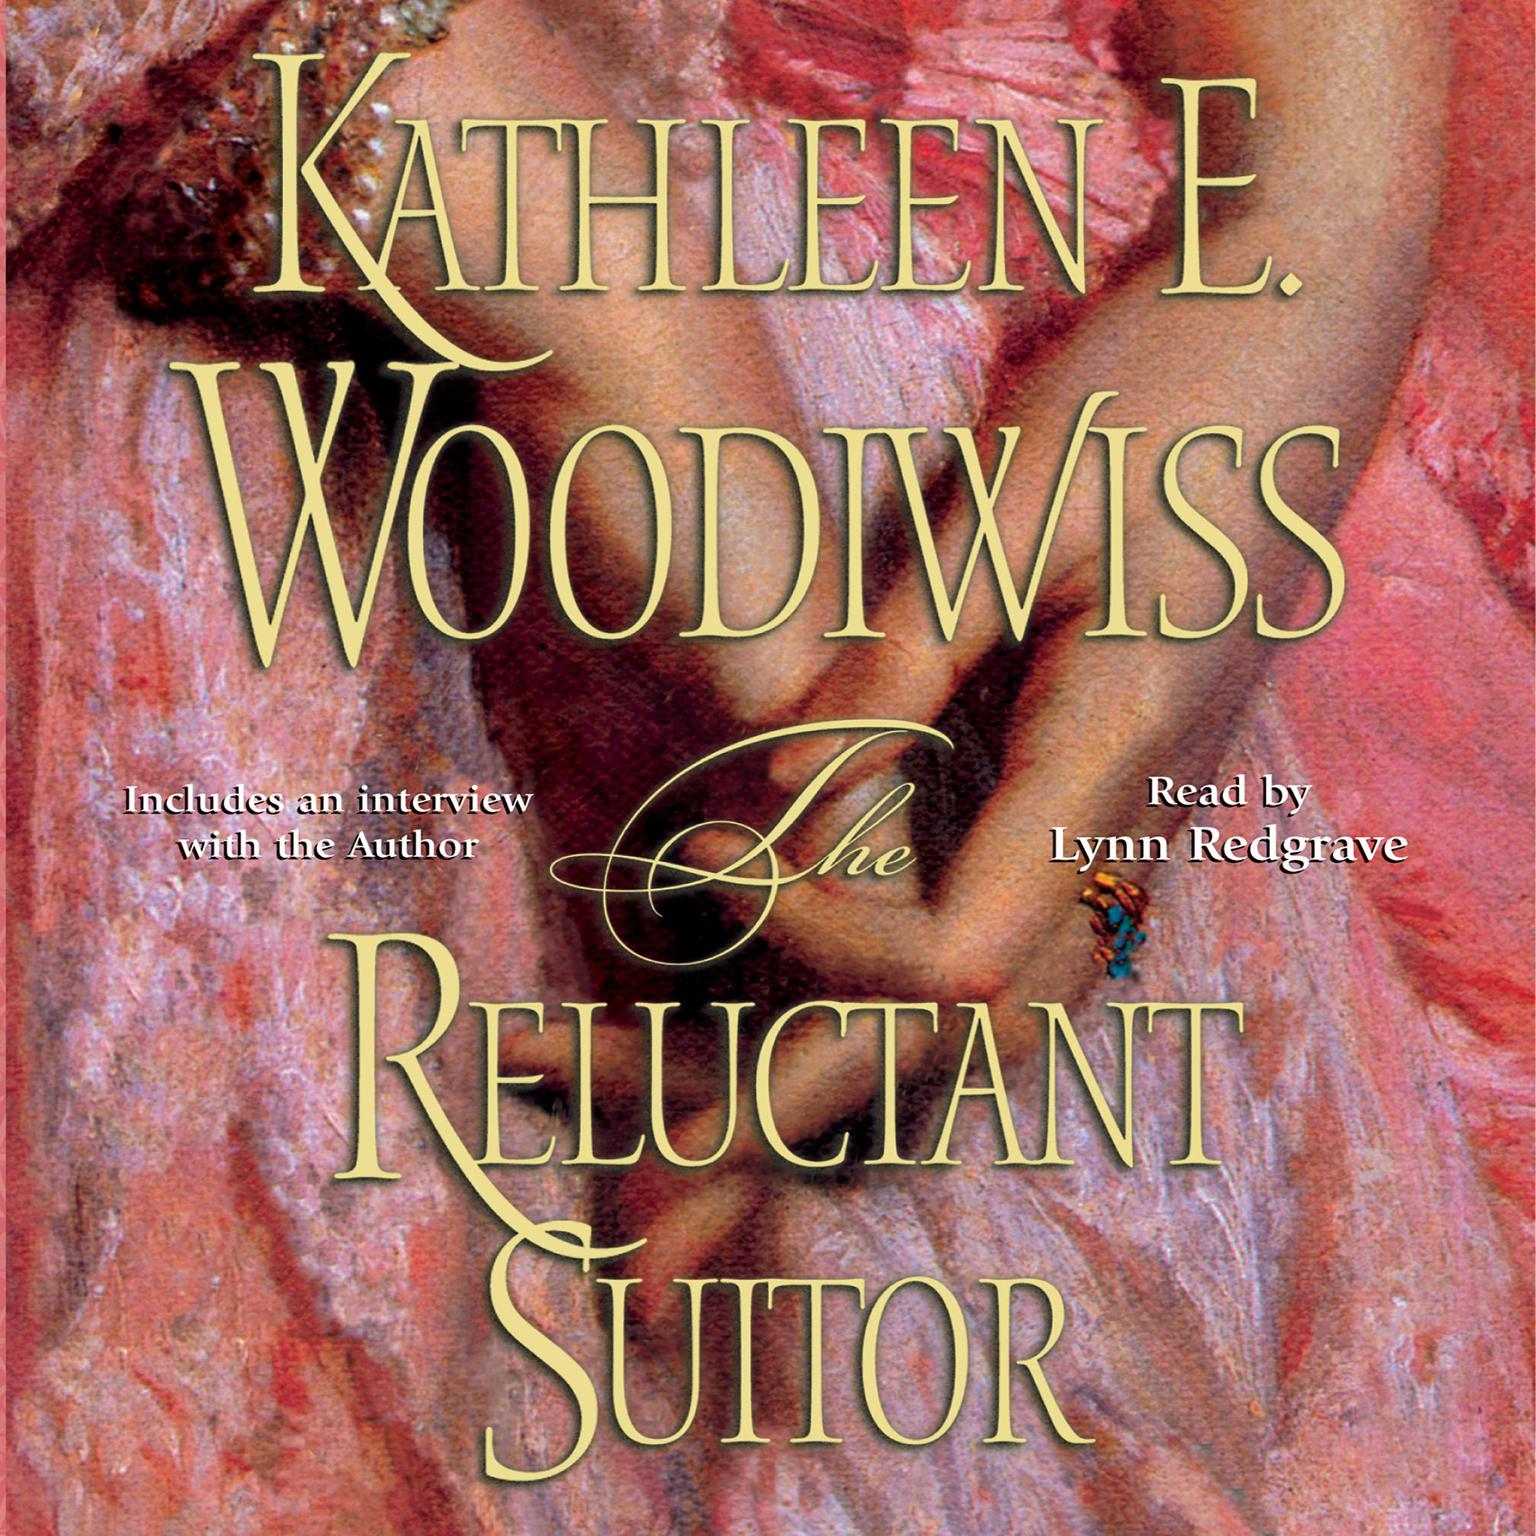 The Reluctant Suitor (Abridged) Audiobook, by Kathleen E. Woodiwiss